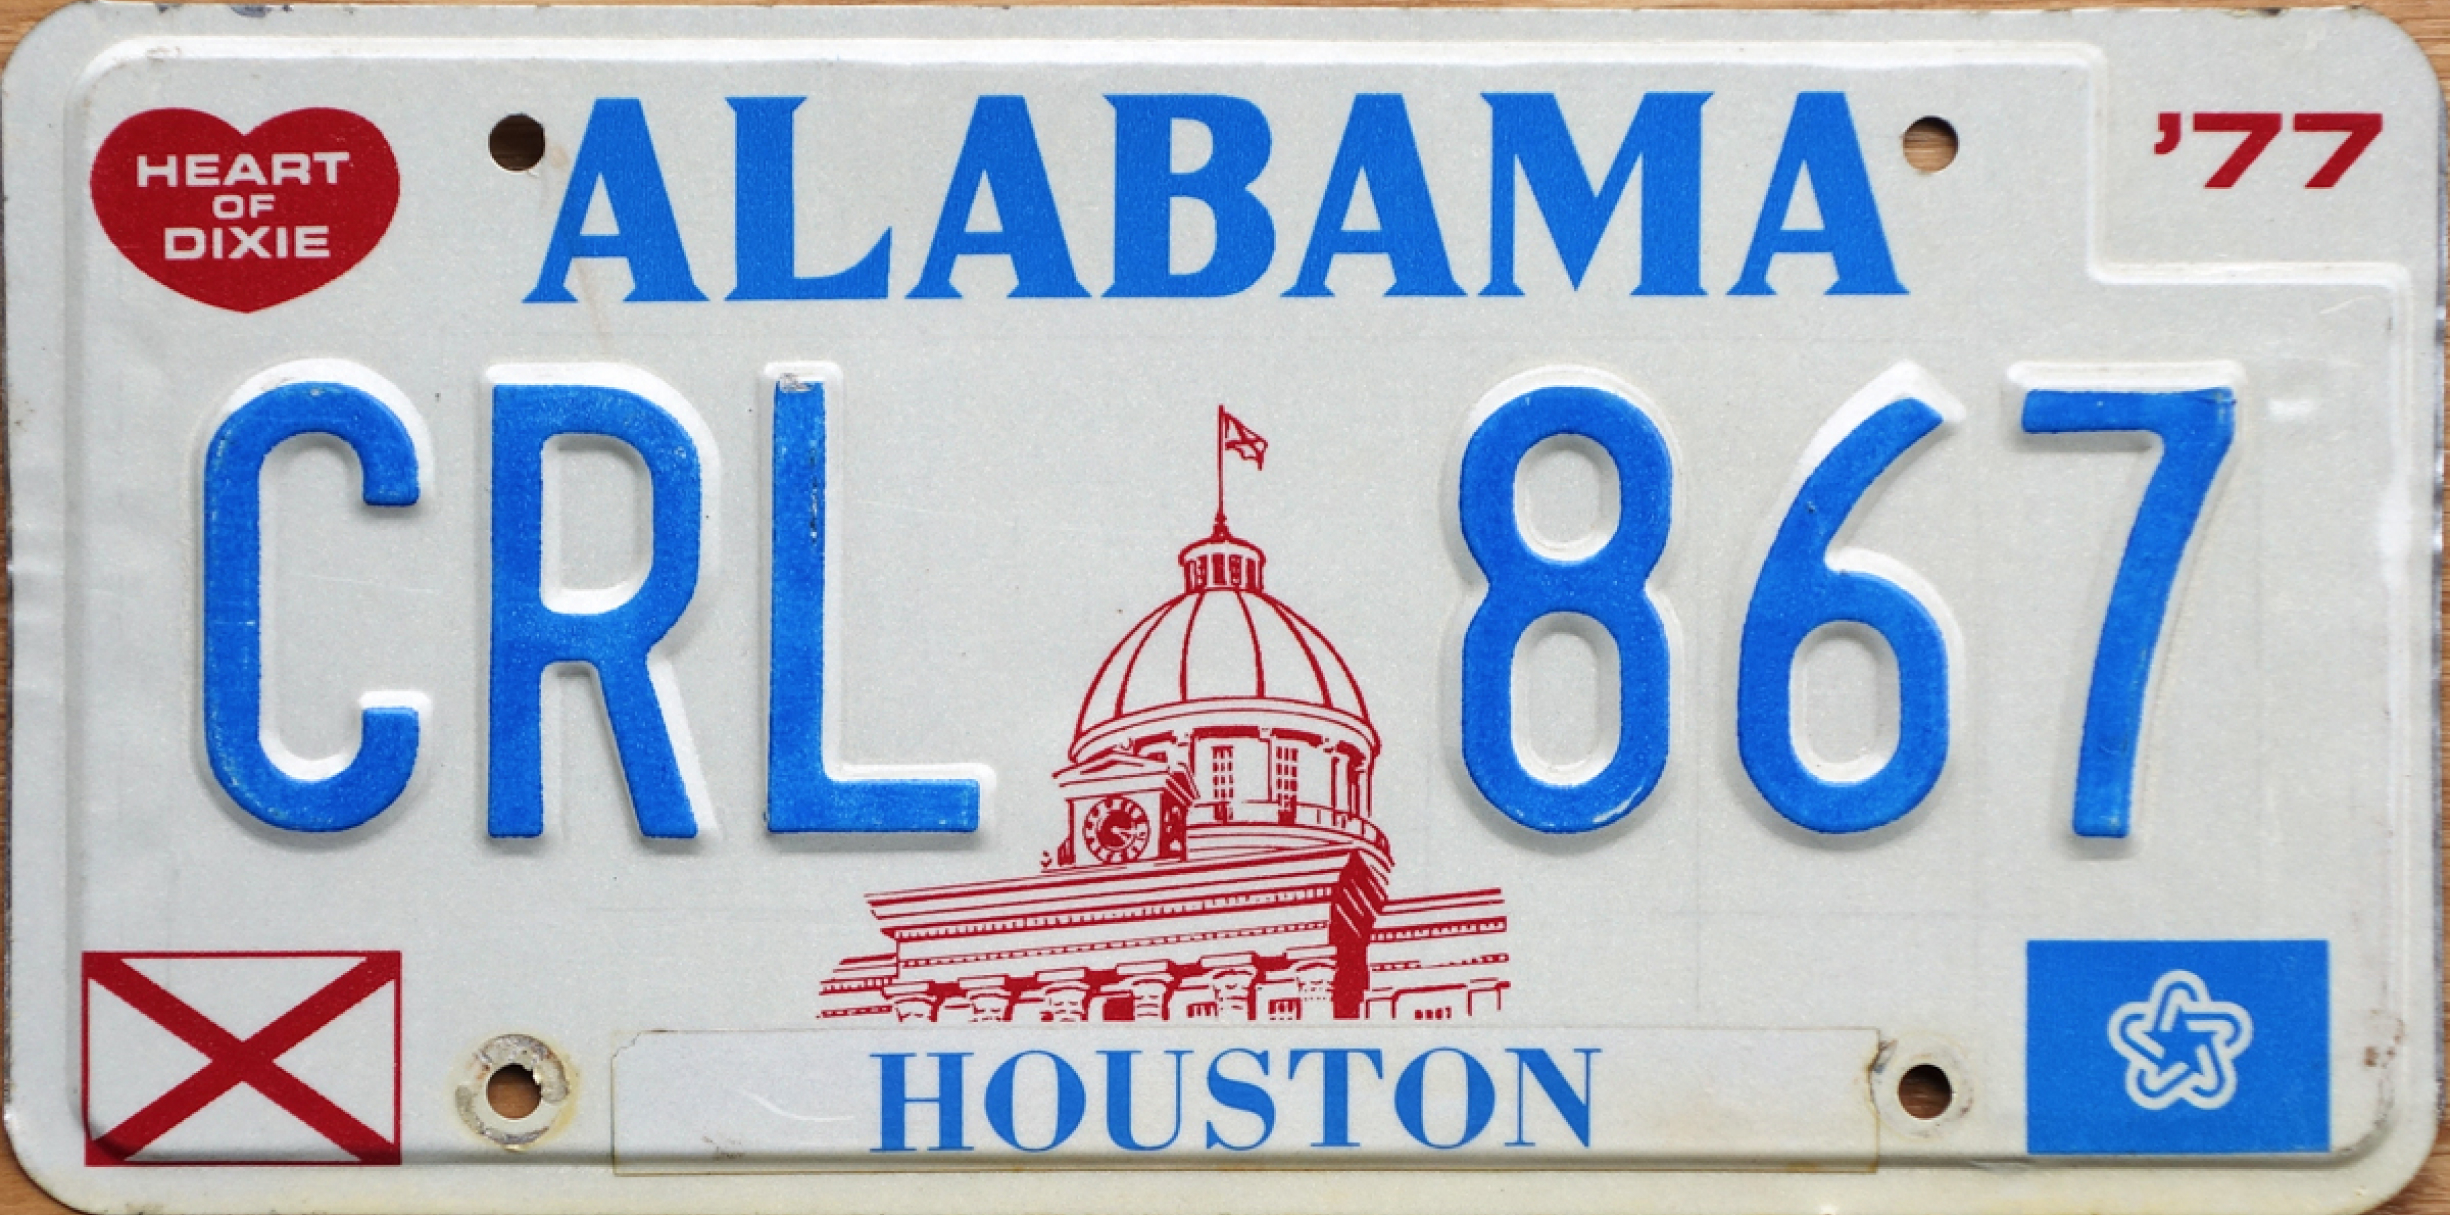 A 1976 Alabama license plate with the number CRL 867